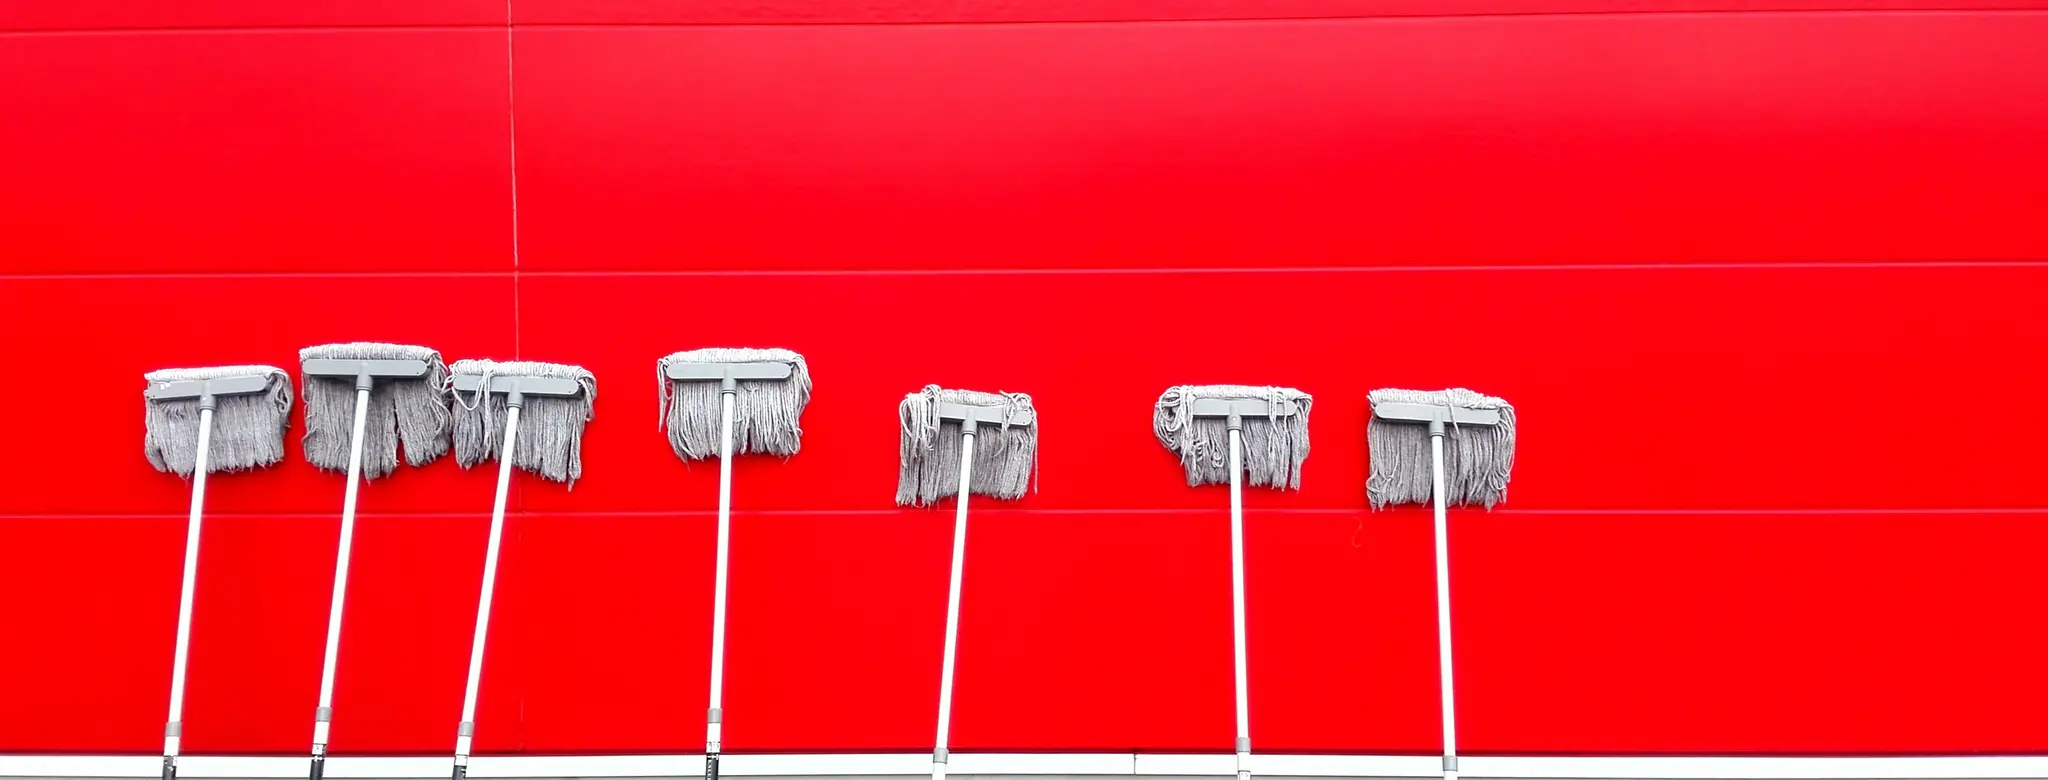 Mops against red wall